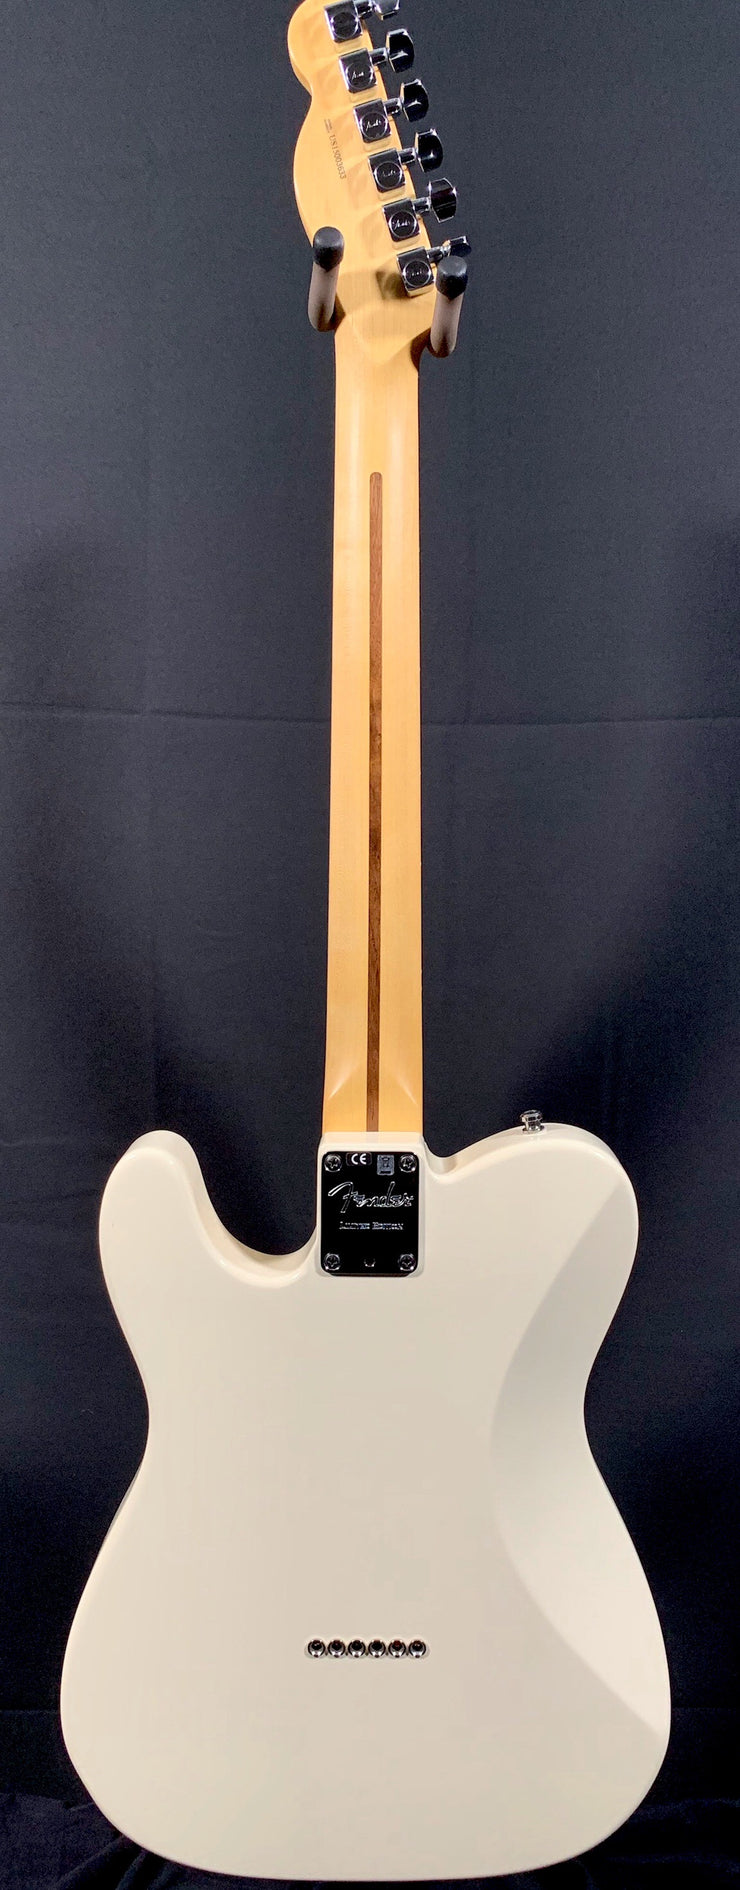 ****SOLD**** 2015 Fender Limited Edition Telecaster Only 100 made